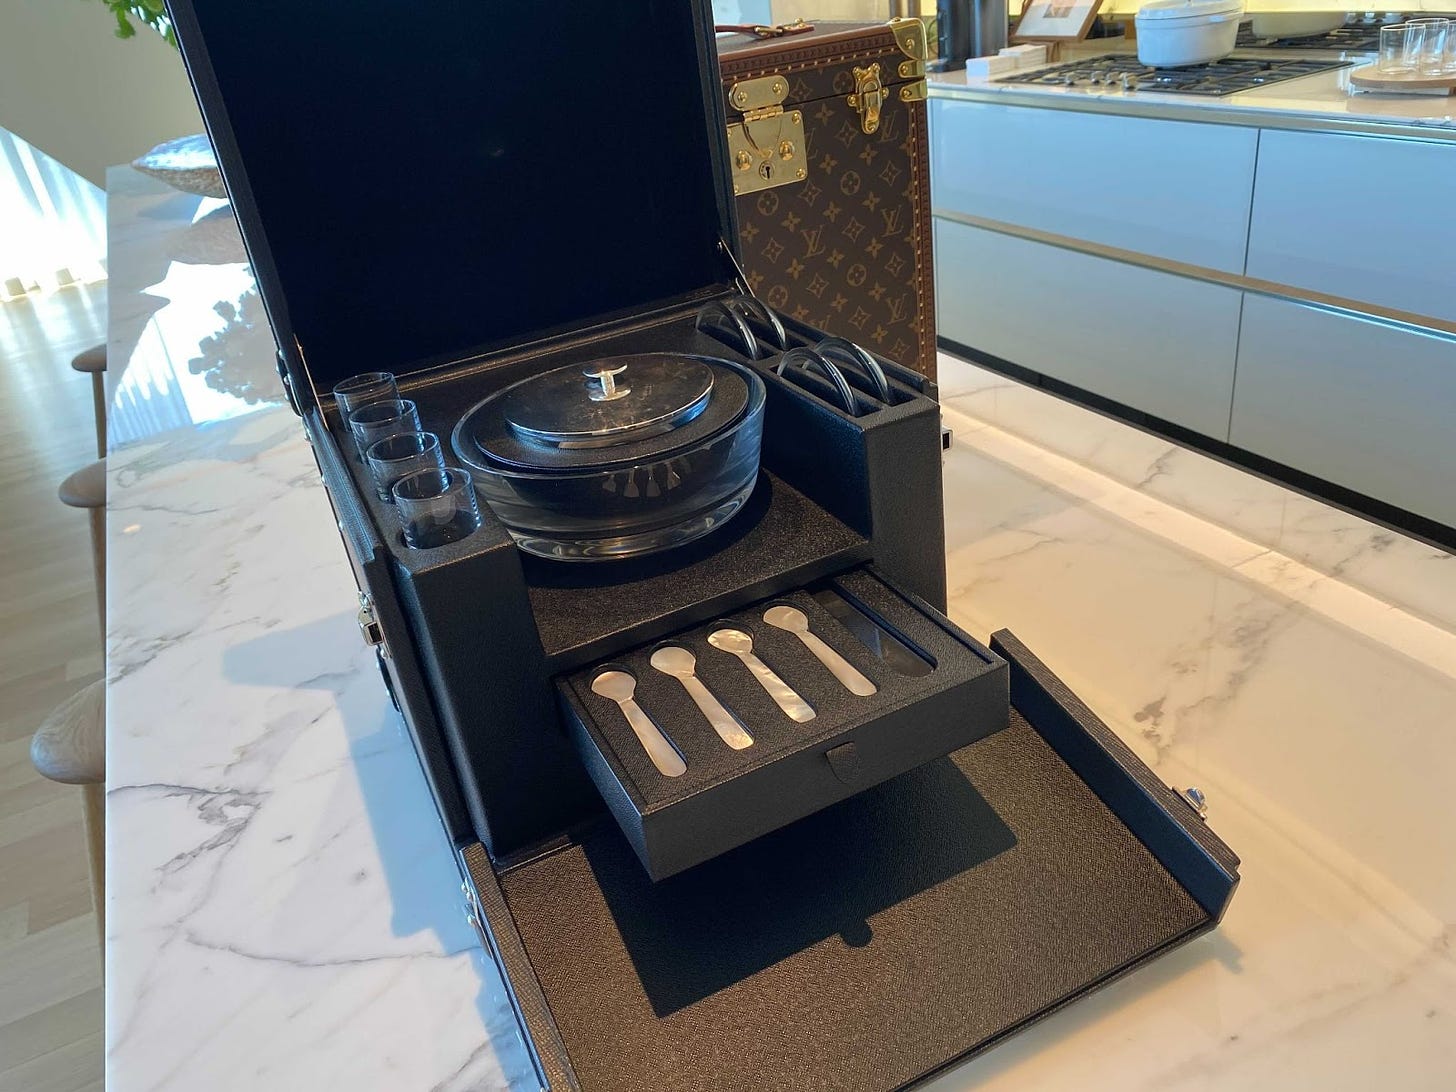 The caviar trunk is a matte black cube, top lid tilted up and front folded down to reveal a drawer of caviar spoons, and a bowl, presumably to hold the caviar. It sits on a shiny marble countertop and looks insanely wealthy.